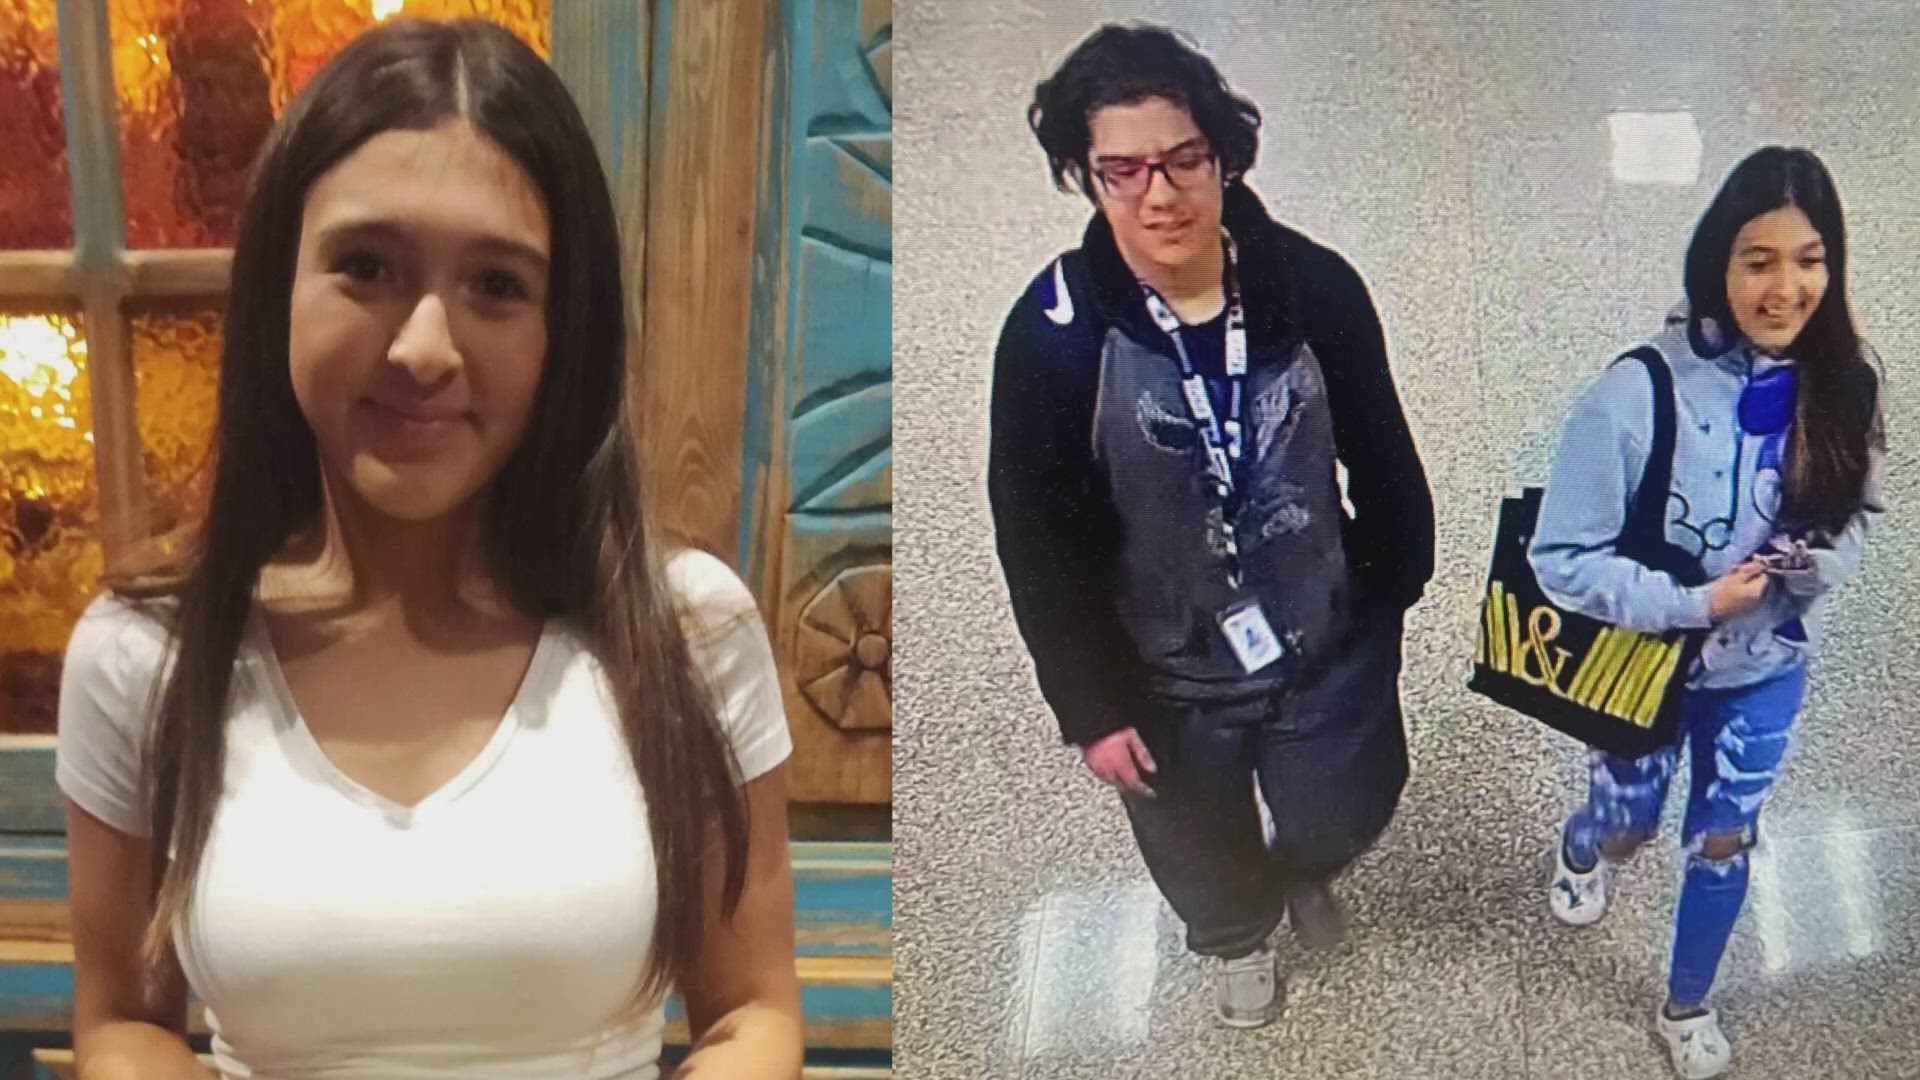 Navieve Isabelle Natividad and Jondavion Gonzales were both found unharmed, according to Fort Stockton Police Department.